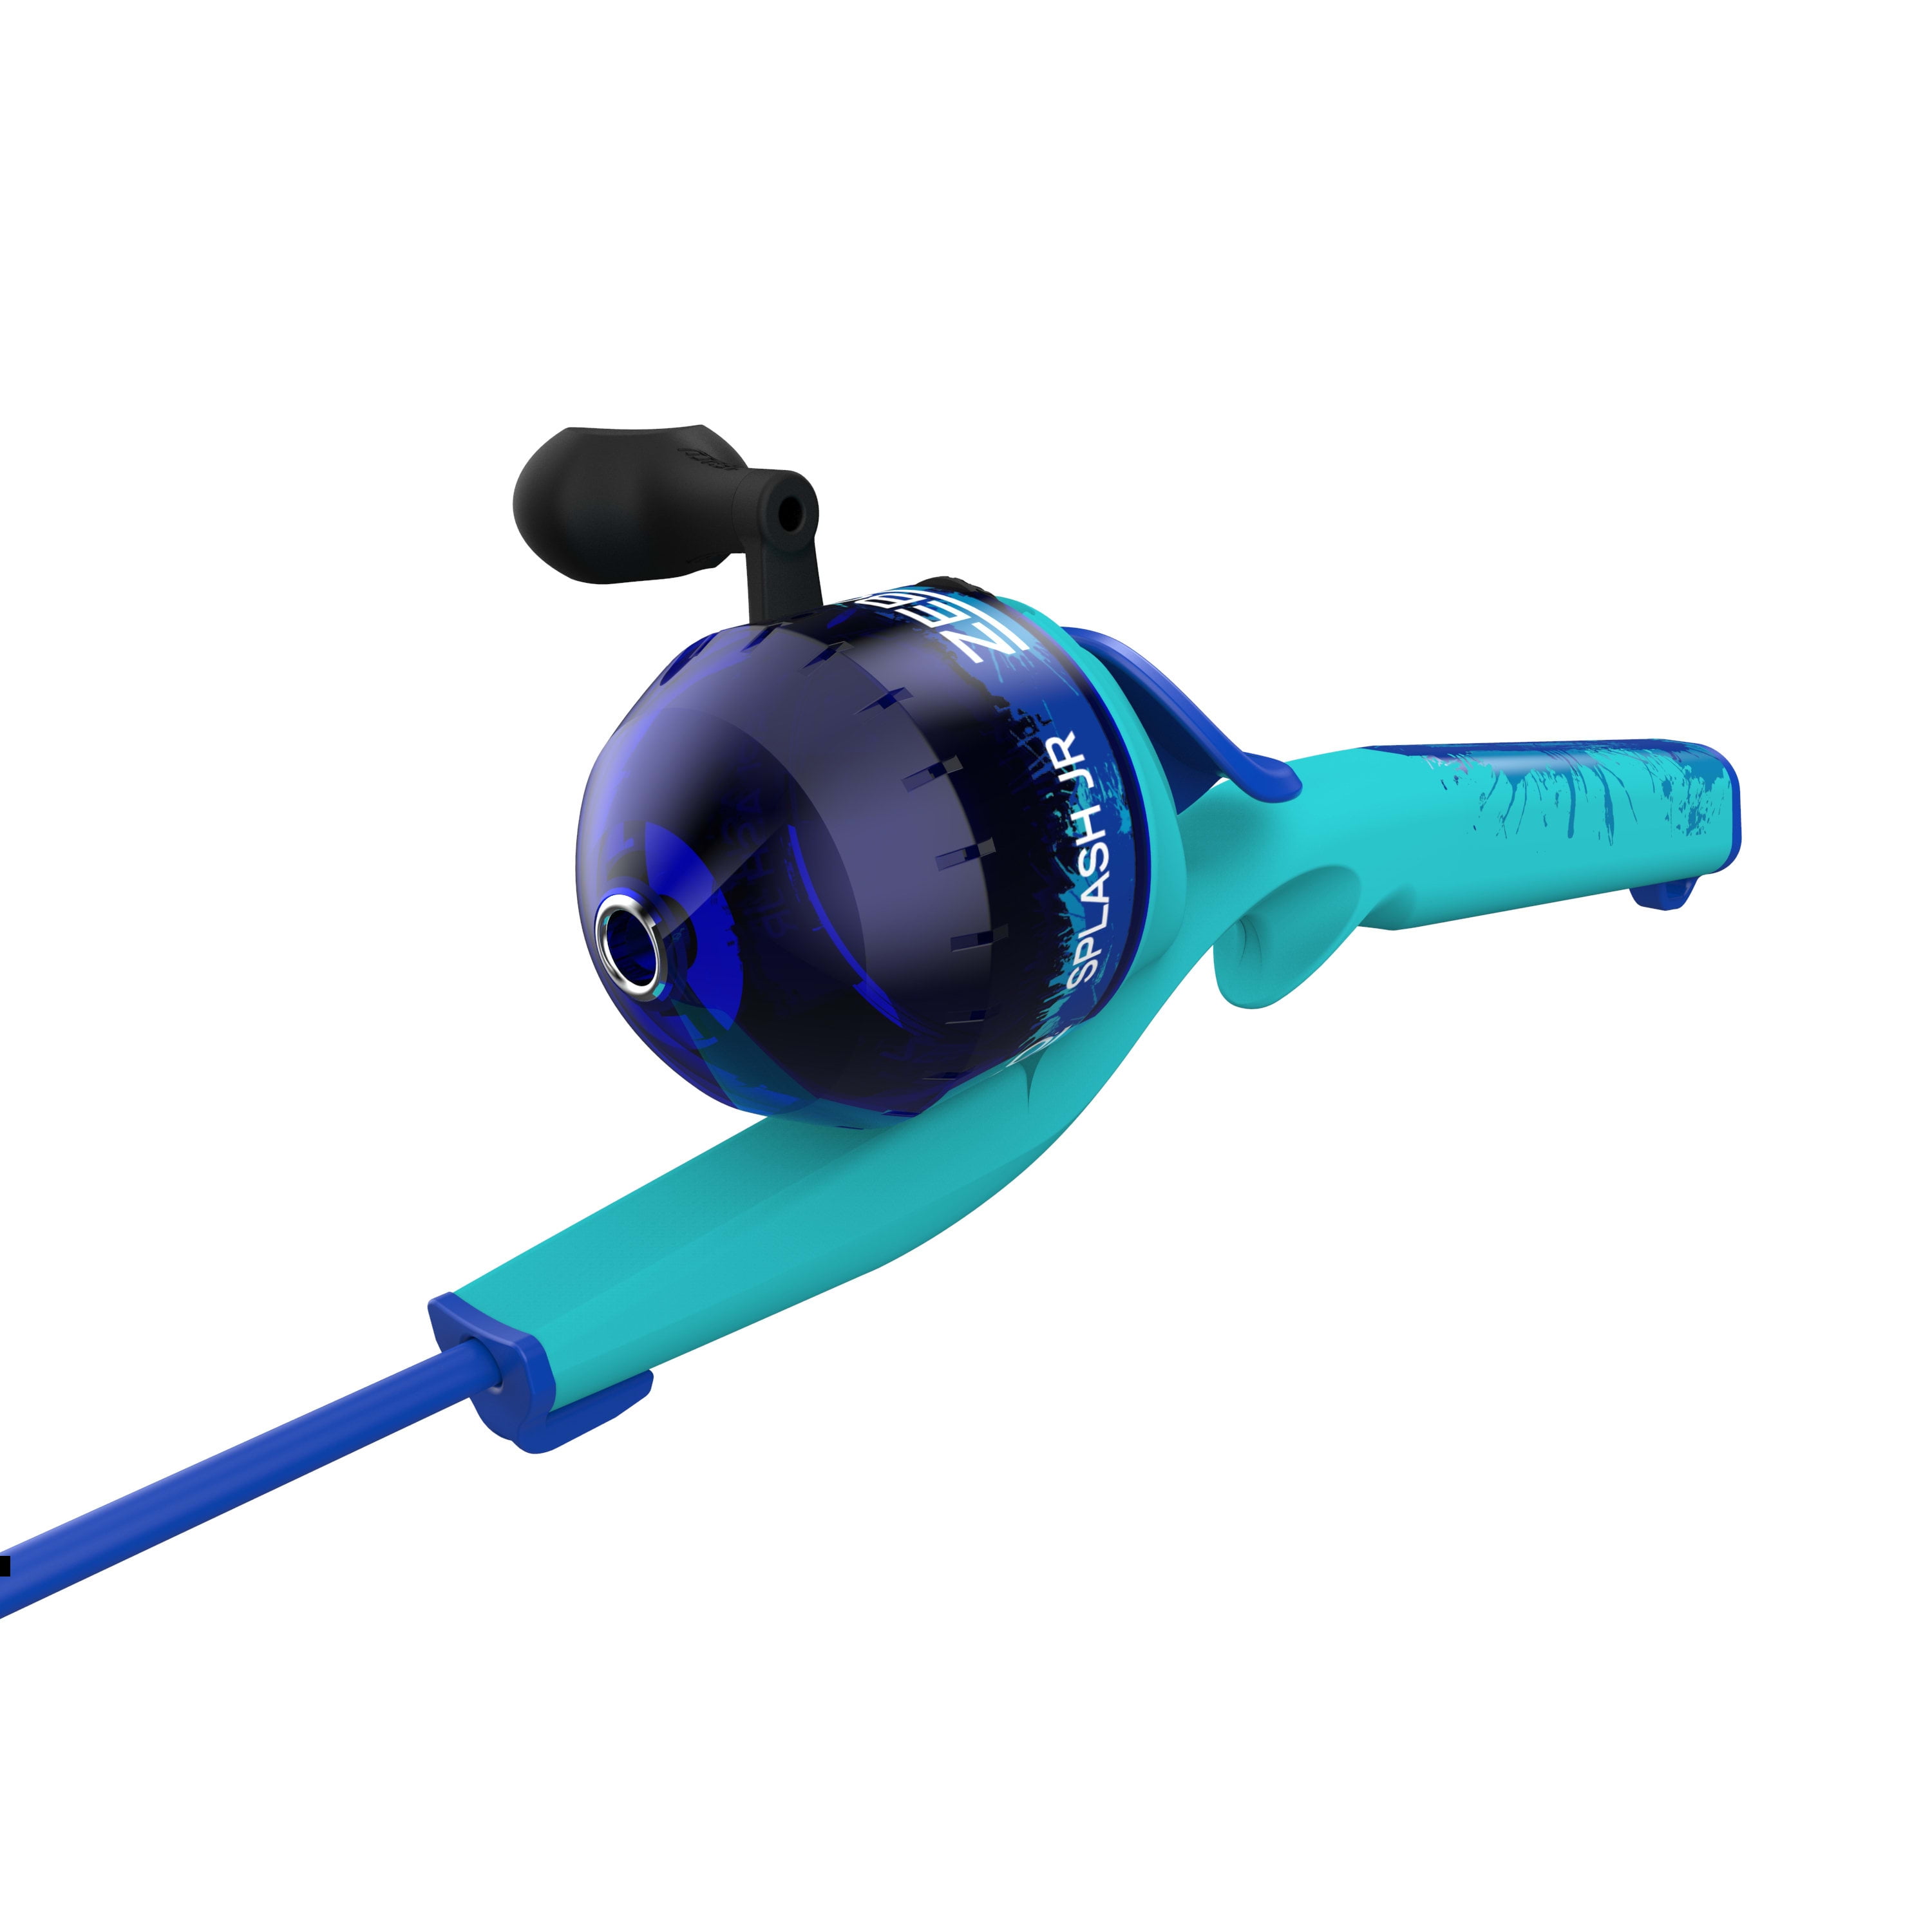 Zebco Splash Kids Spincast Reel and Fishing Rod Combo 29 Durable Floating  Fiberglass Rod with Tangle-Free Design Oversized Reel Handle Knob  Pre-Spooled with 6-Pound Zebco Fishing Line Blue